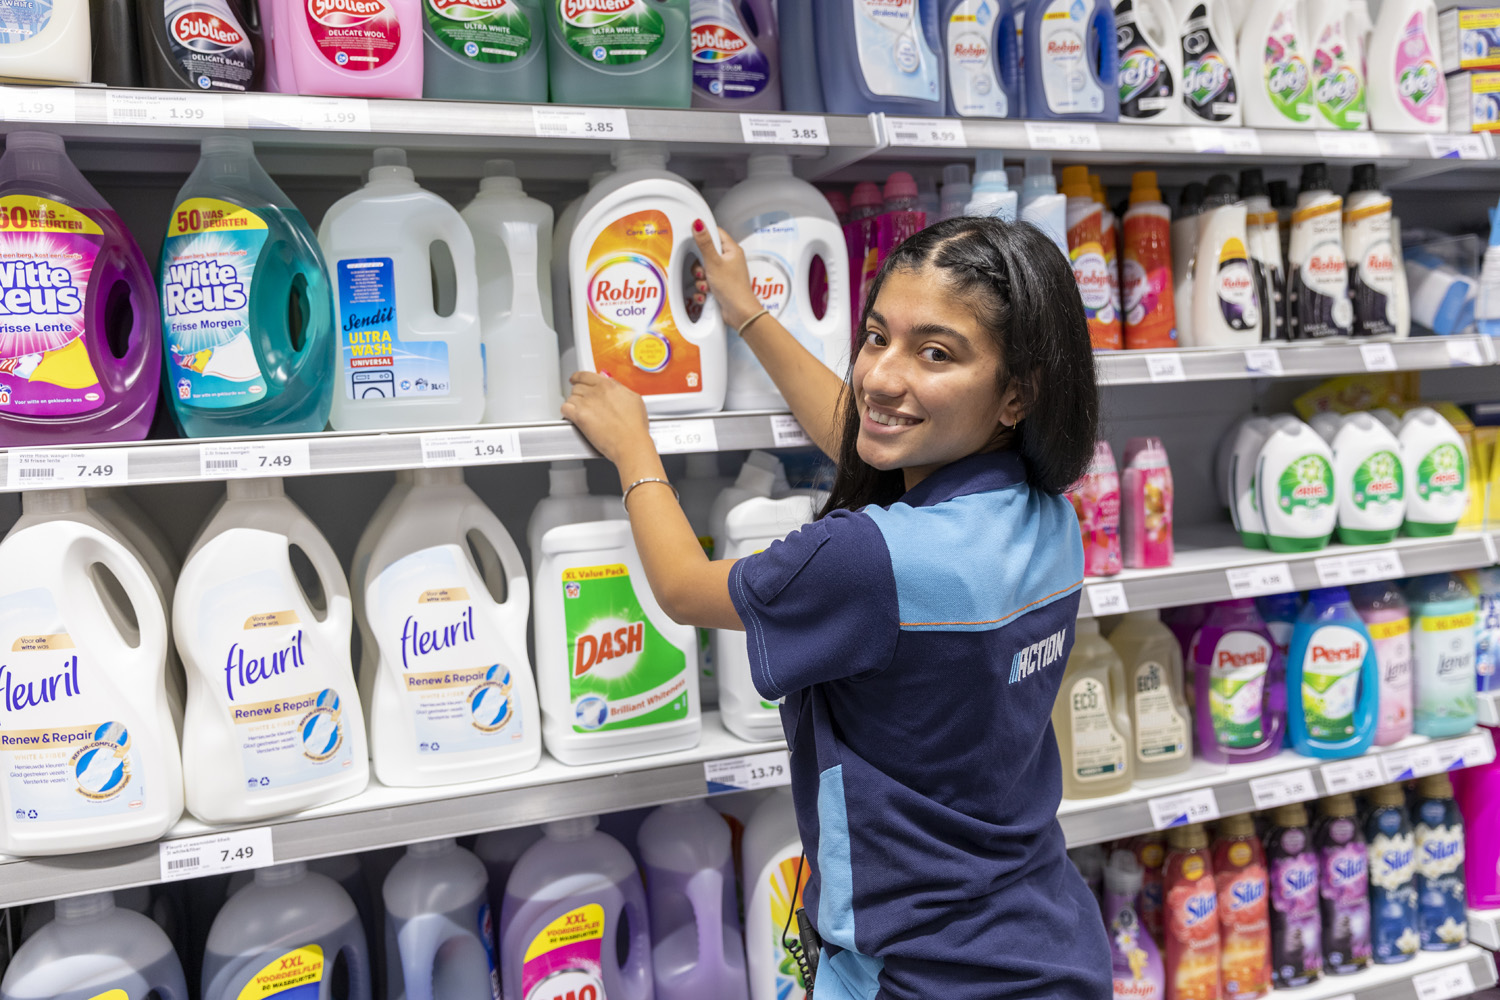 Action employee at laundry detergent